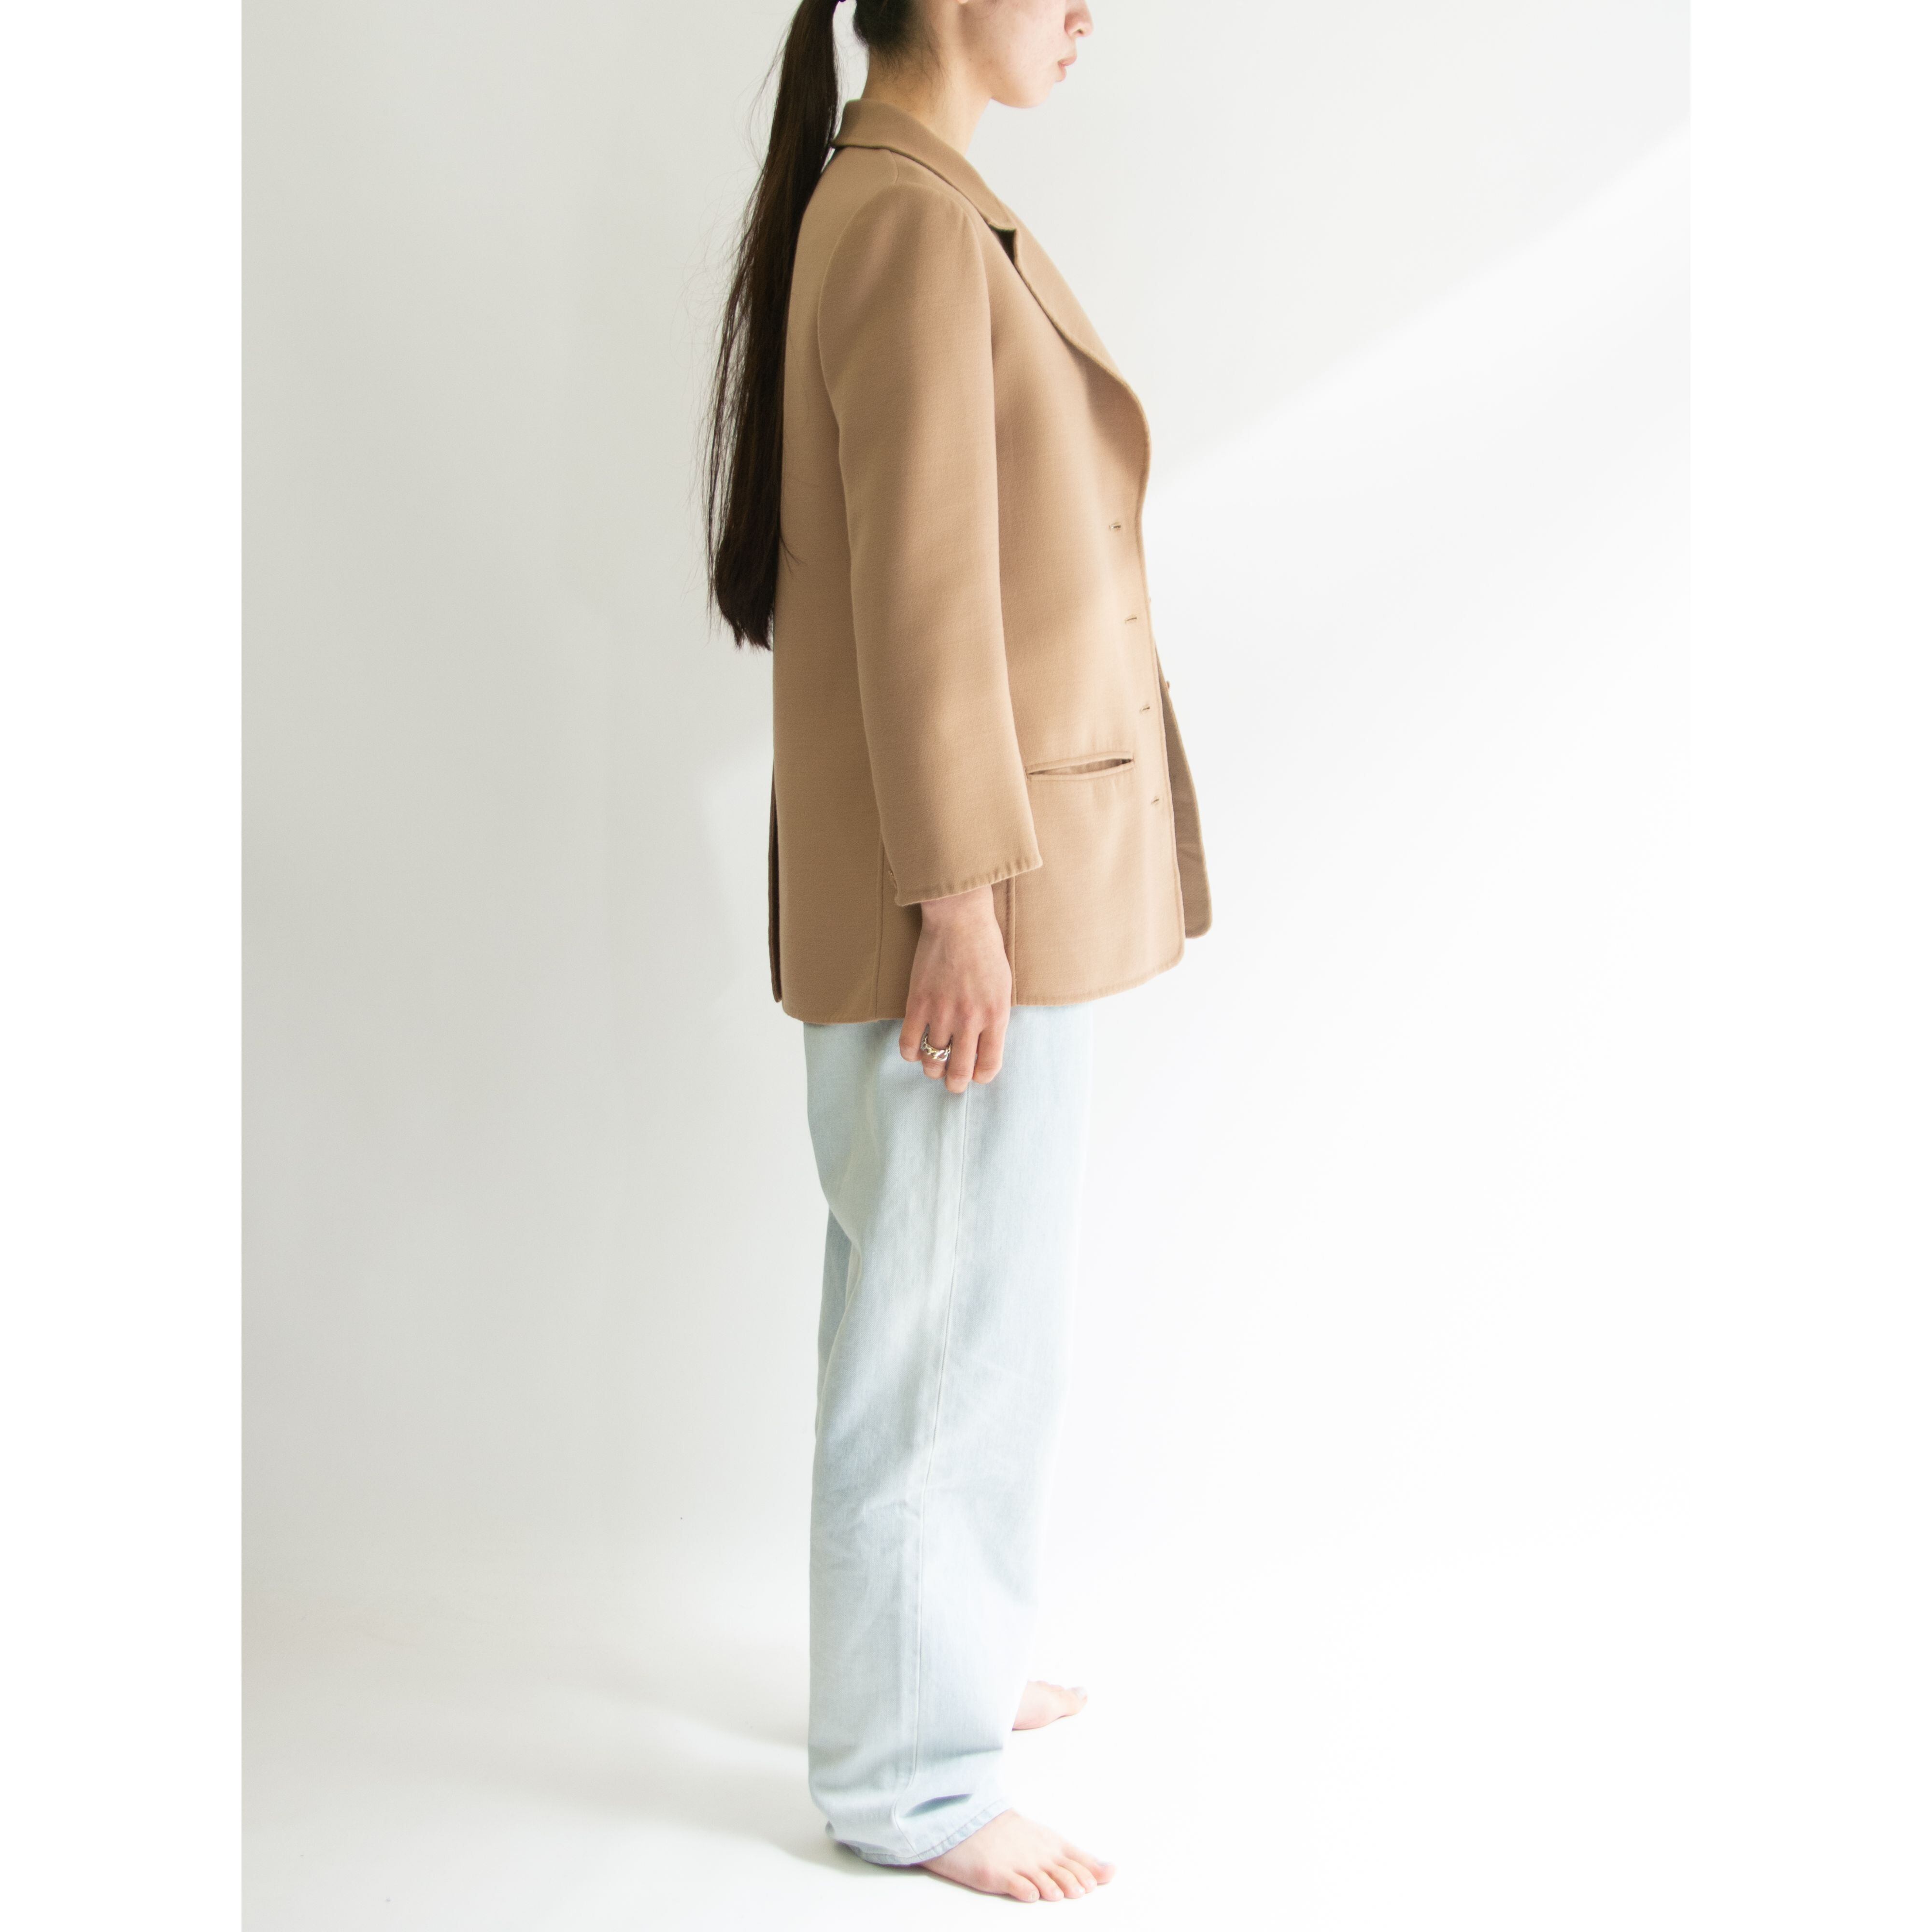 andre laug】Made in Italy 60-70's Wool Jersey Jacket（イタリア製 ...